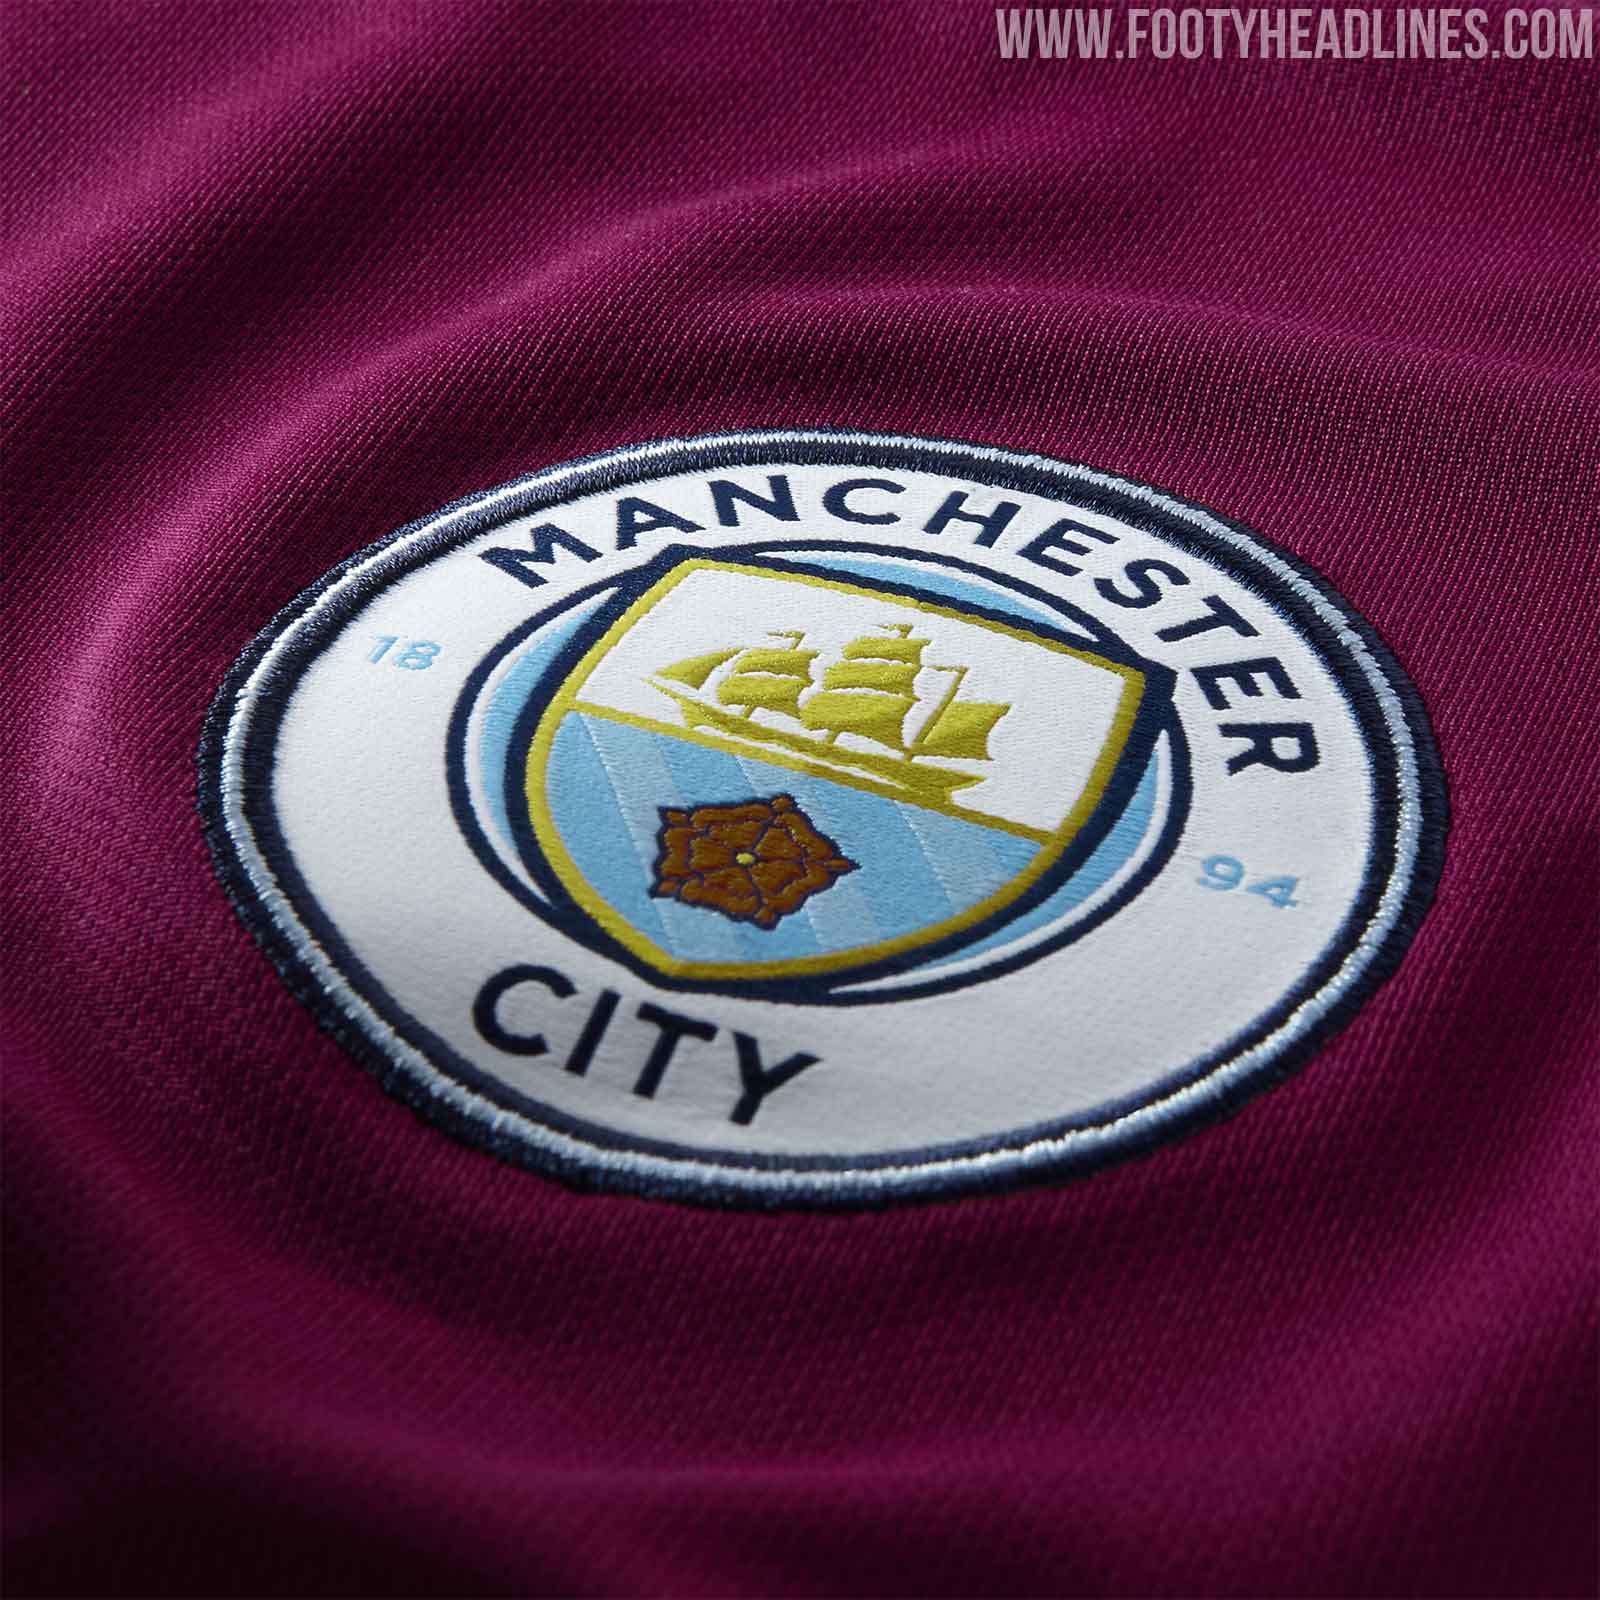 Manchester City States HD Wallpaper and Photo